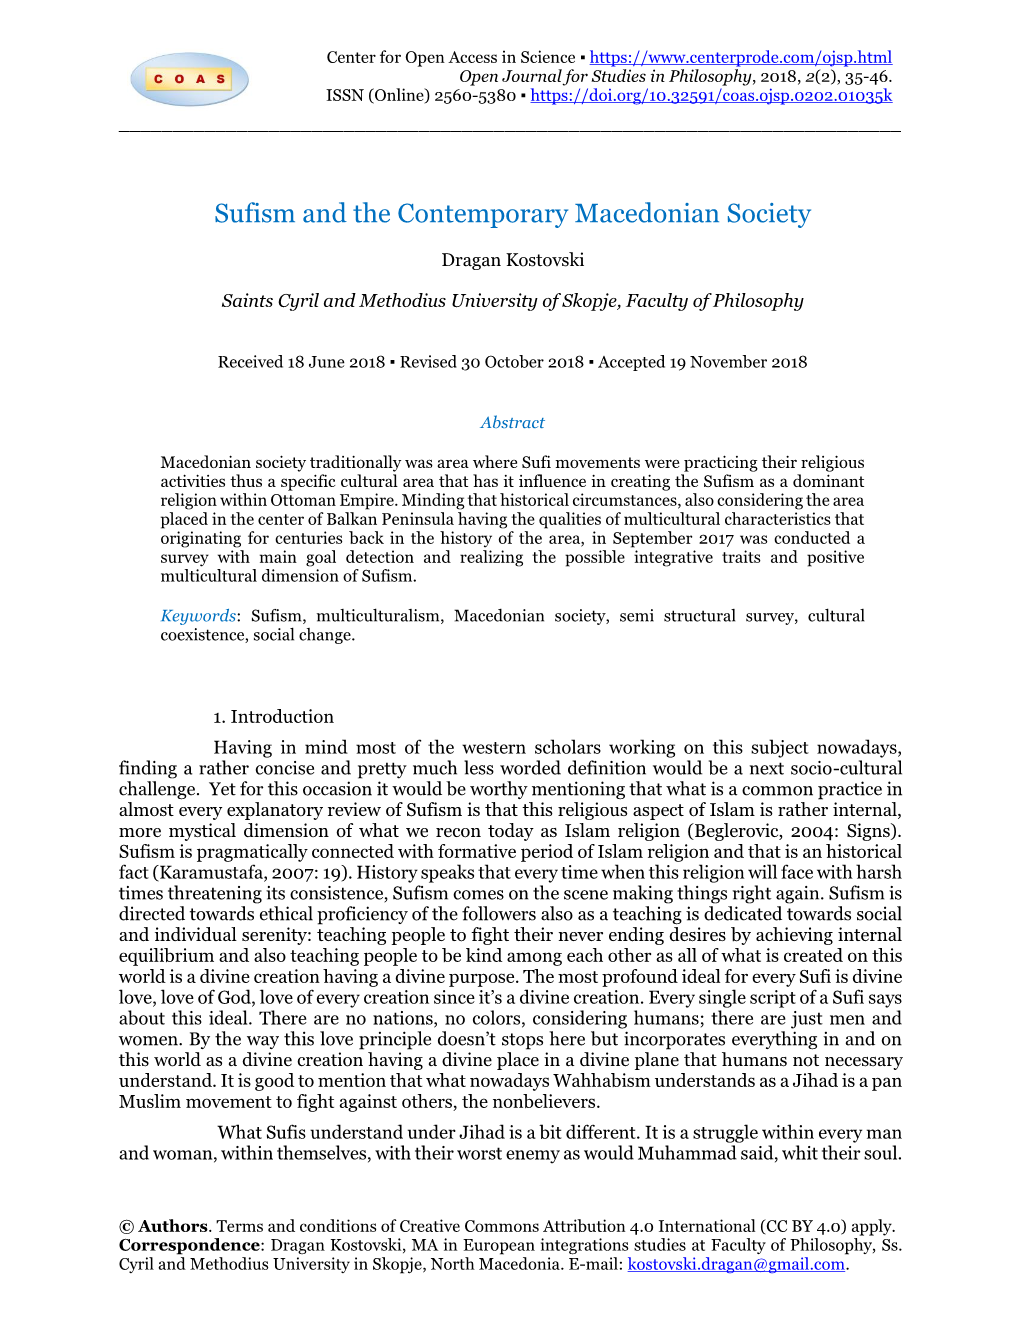 Sufism and the Contemporary Macedonian Society